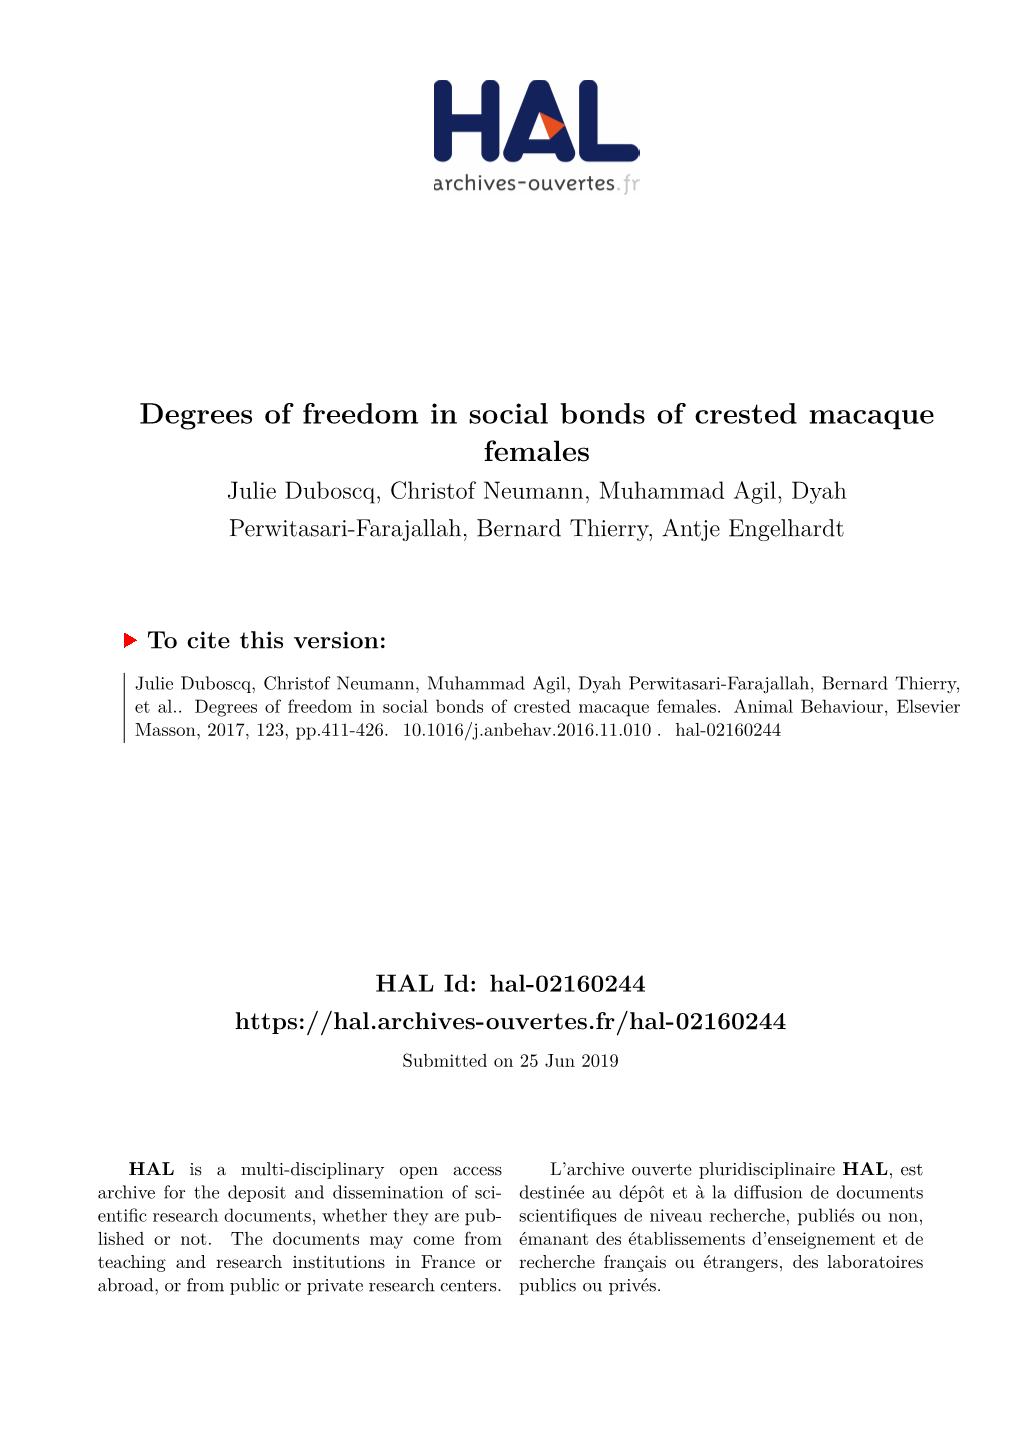 Degrees of Freedom in Social Bonds of Crested Macaque Females